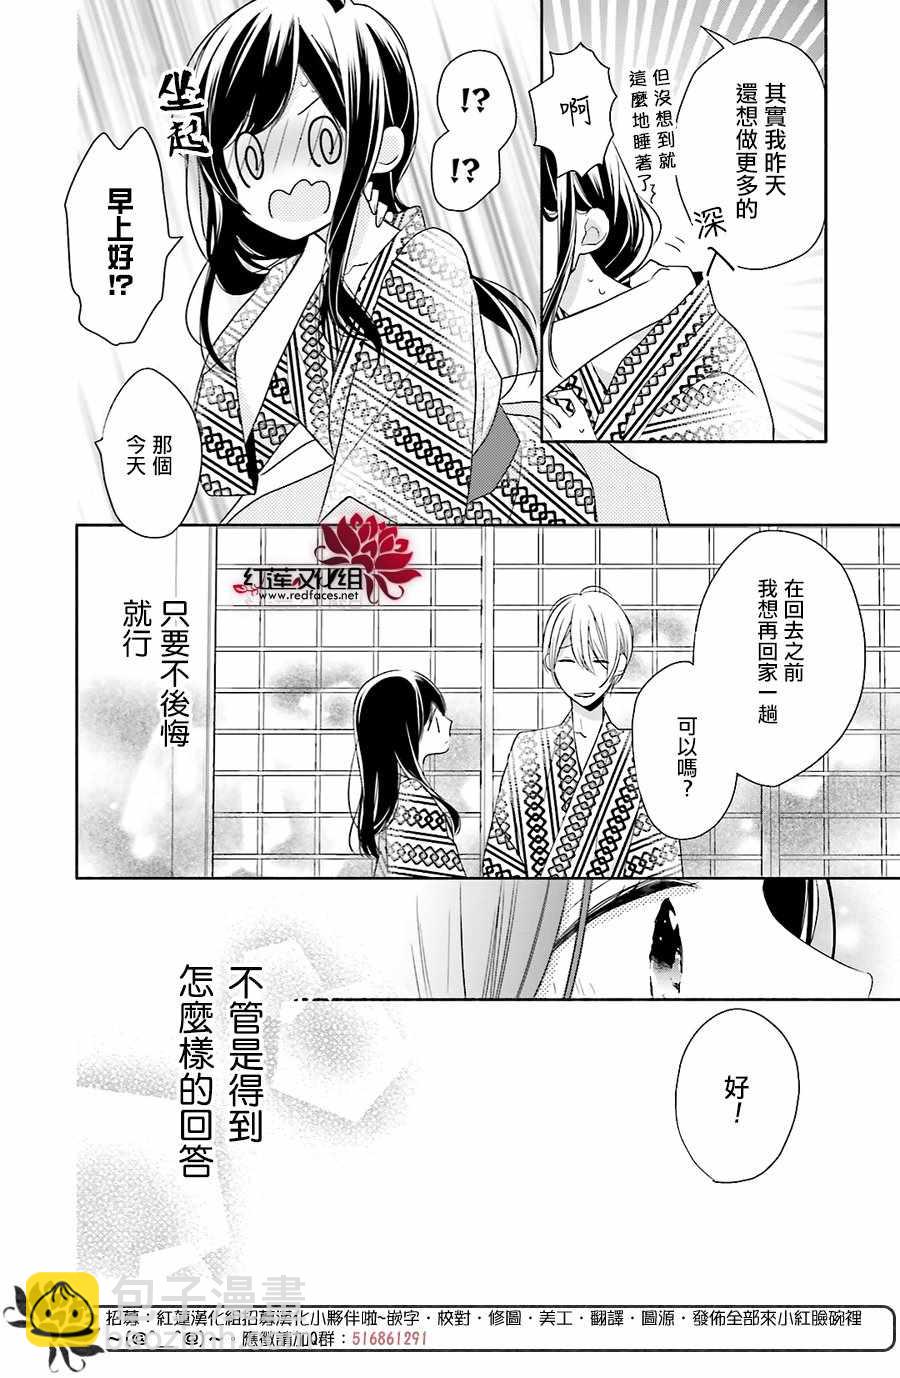 If given a second chance - 11話 - 7